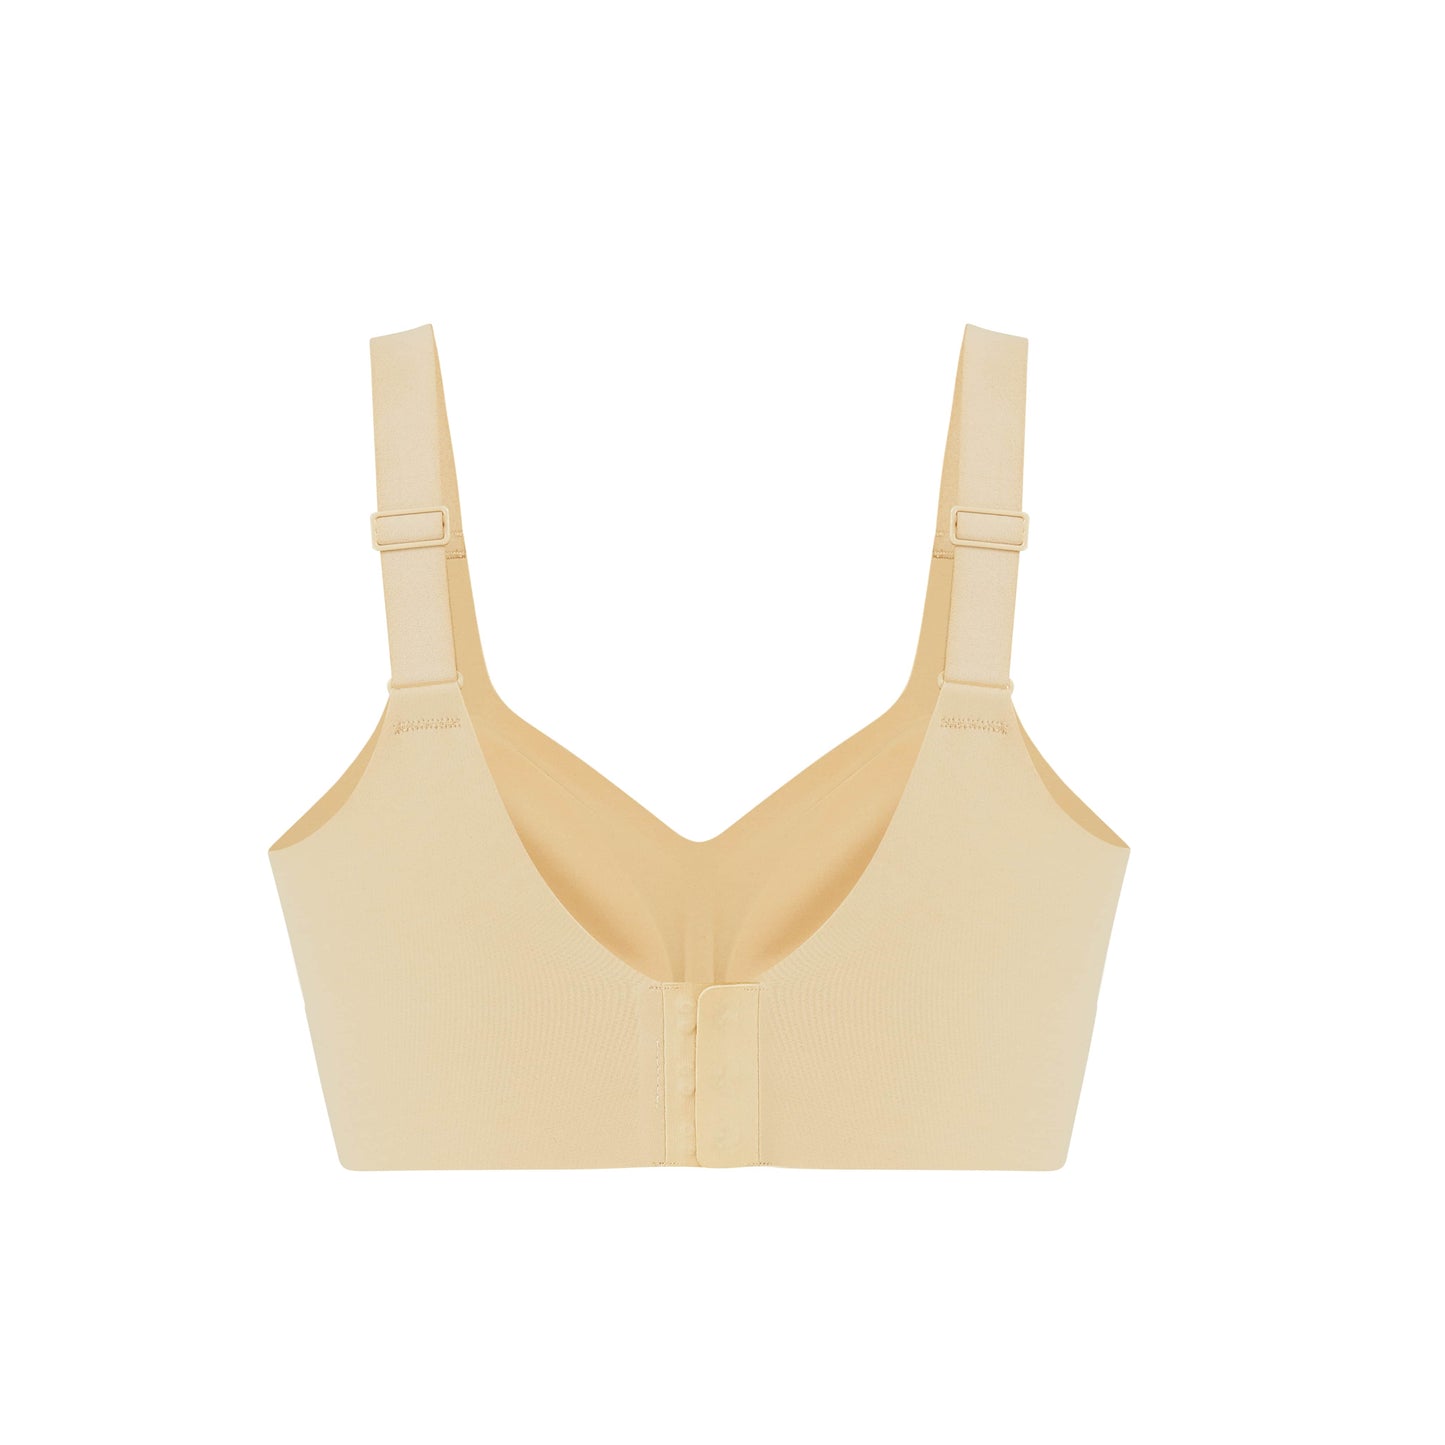 image of the back of light yellow bra with clasps